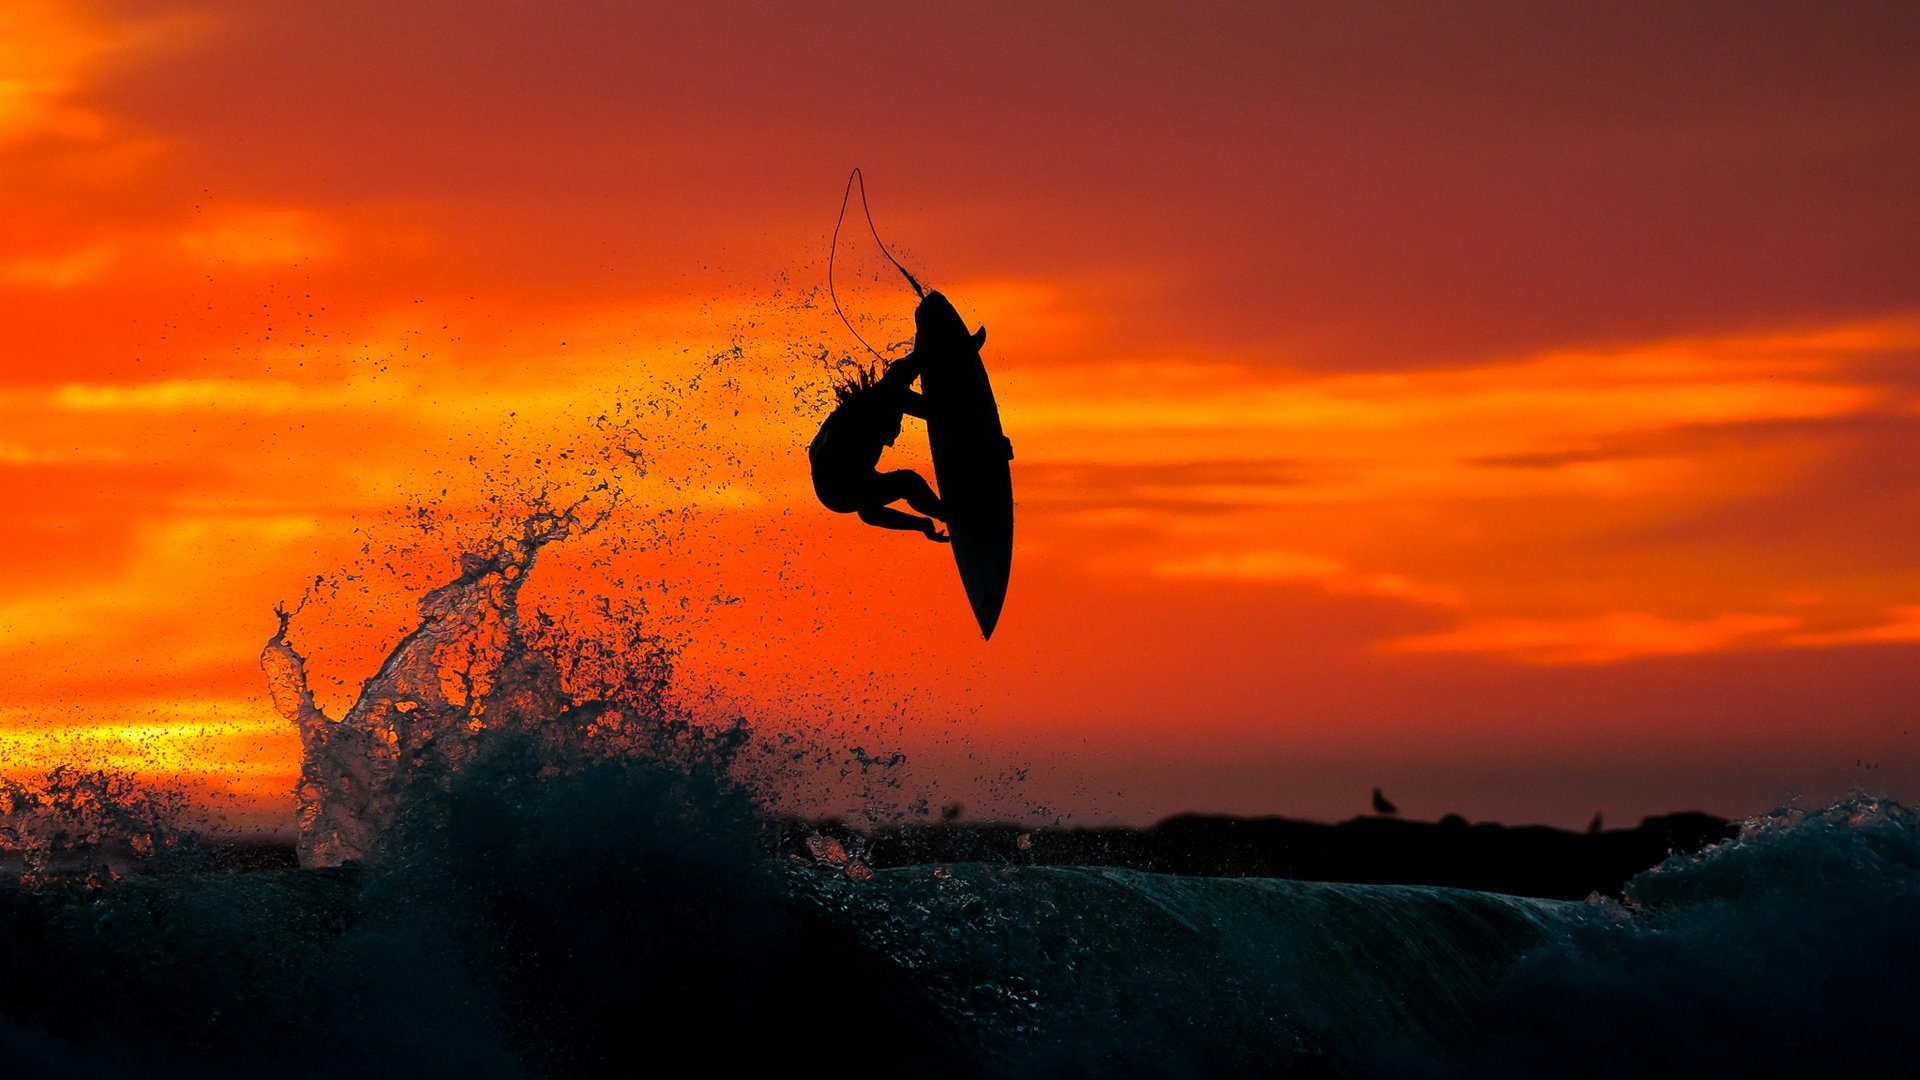 190 Surfing Hd Wallpapers Background Images